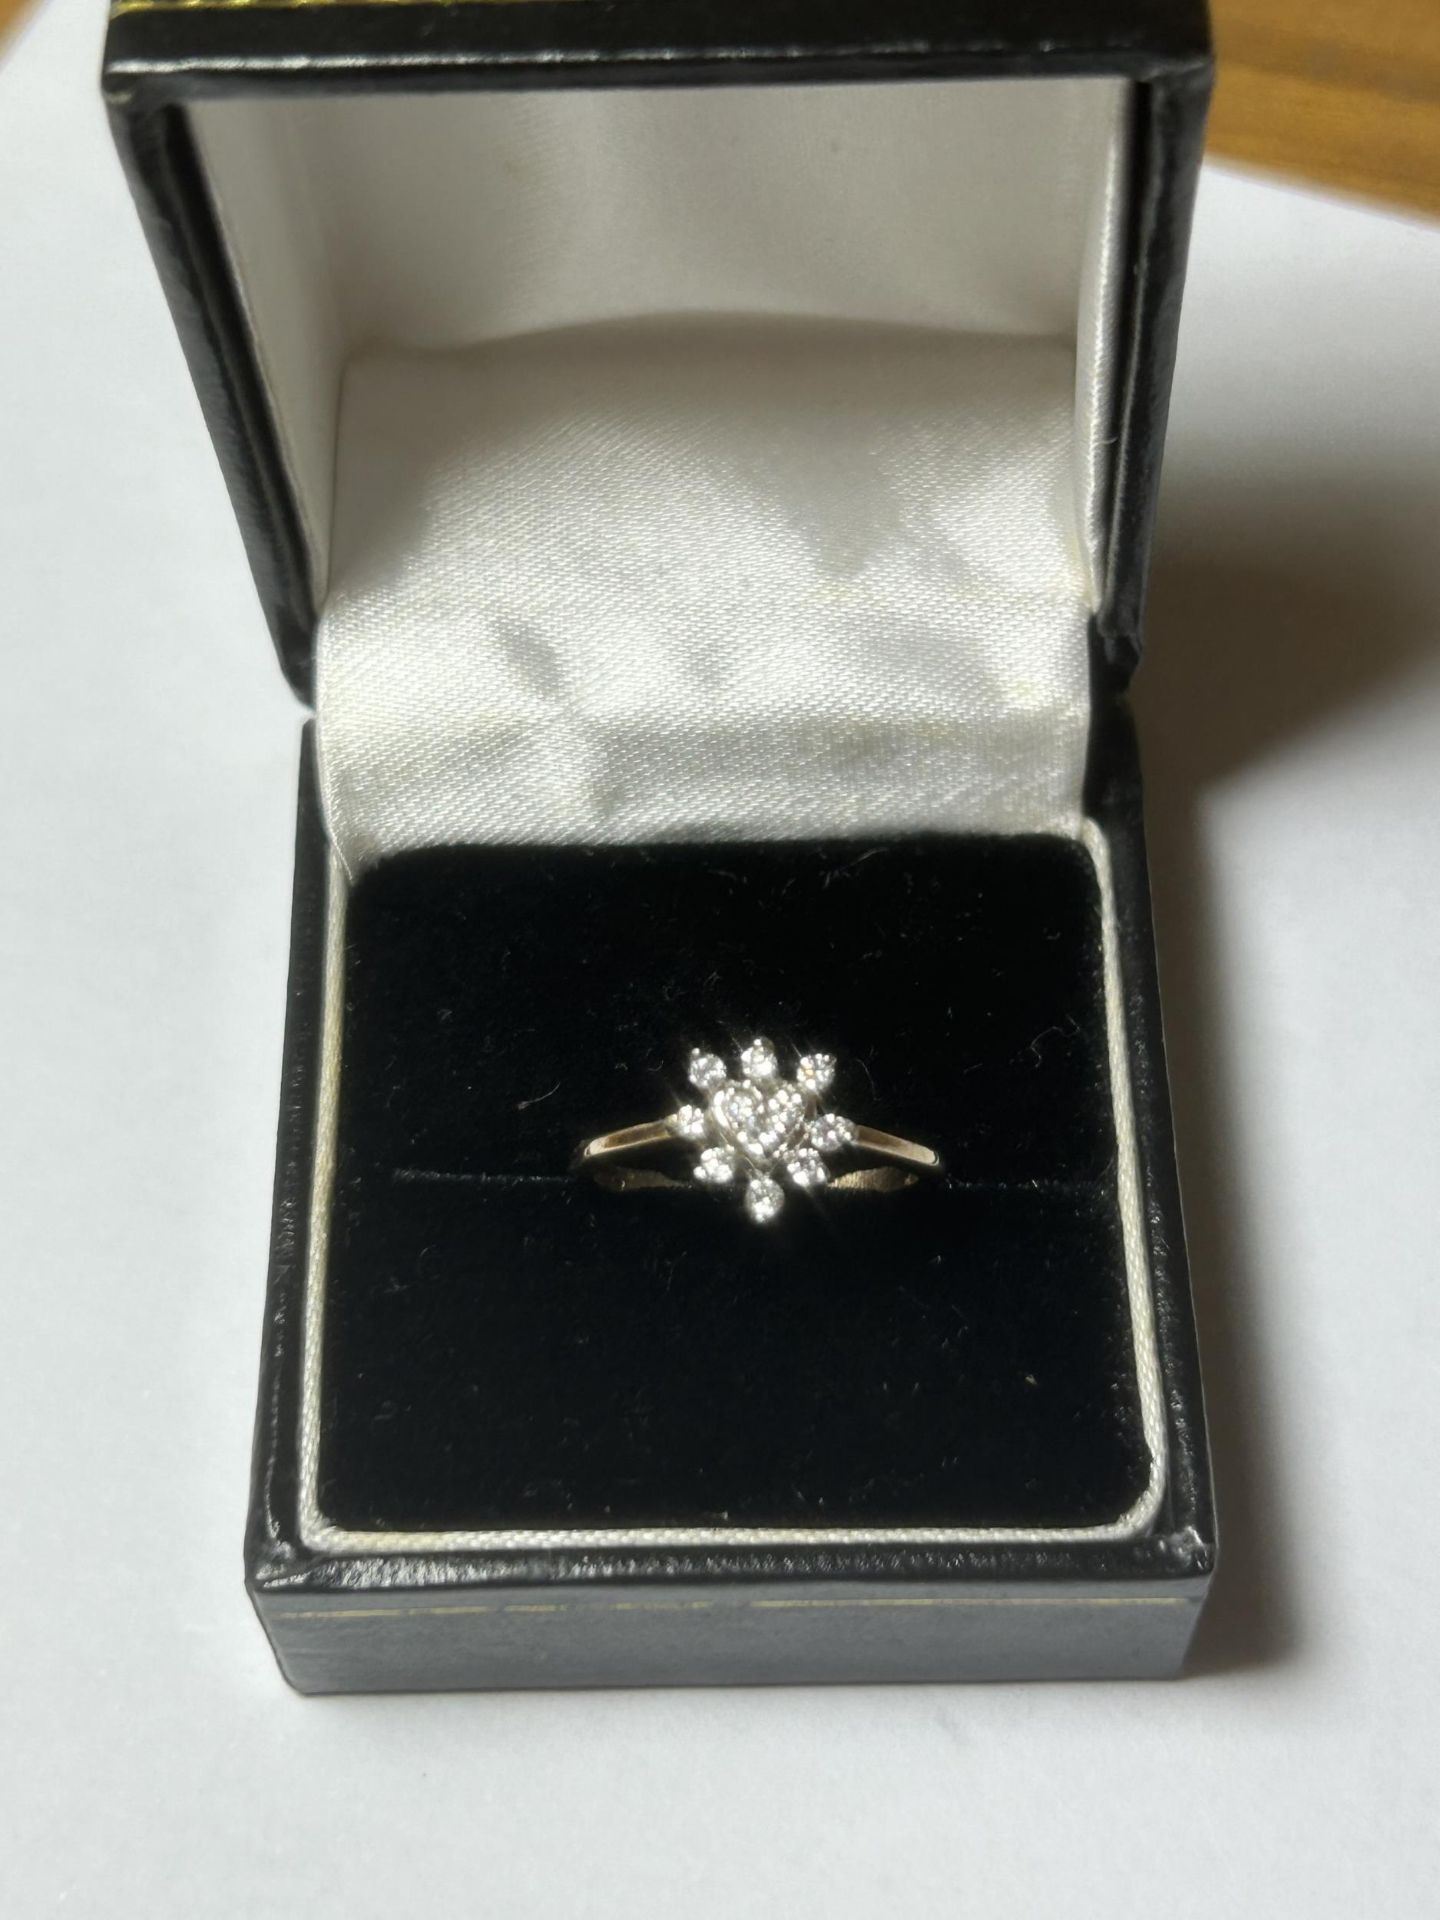 A 9CT YELLOW GOLD DAISY DESIGN RING, WITH CUBIC ZIRCONIAS, SIZE J 1/2 COMPLETE WITH PRESENTATION BOX